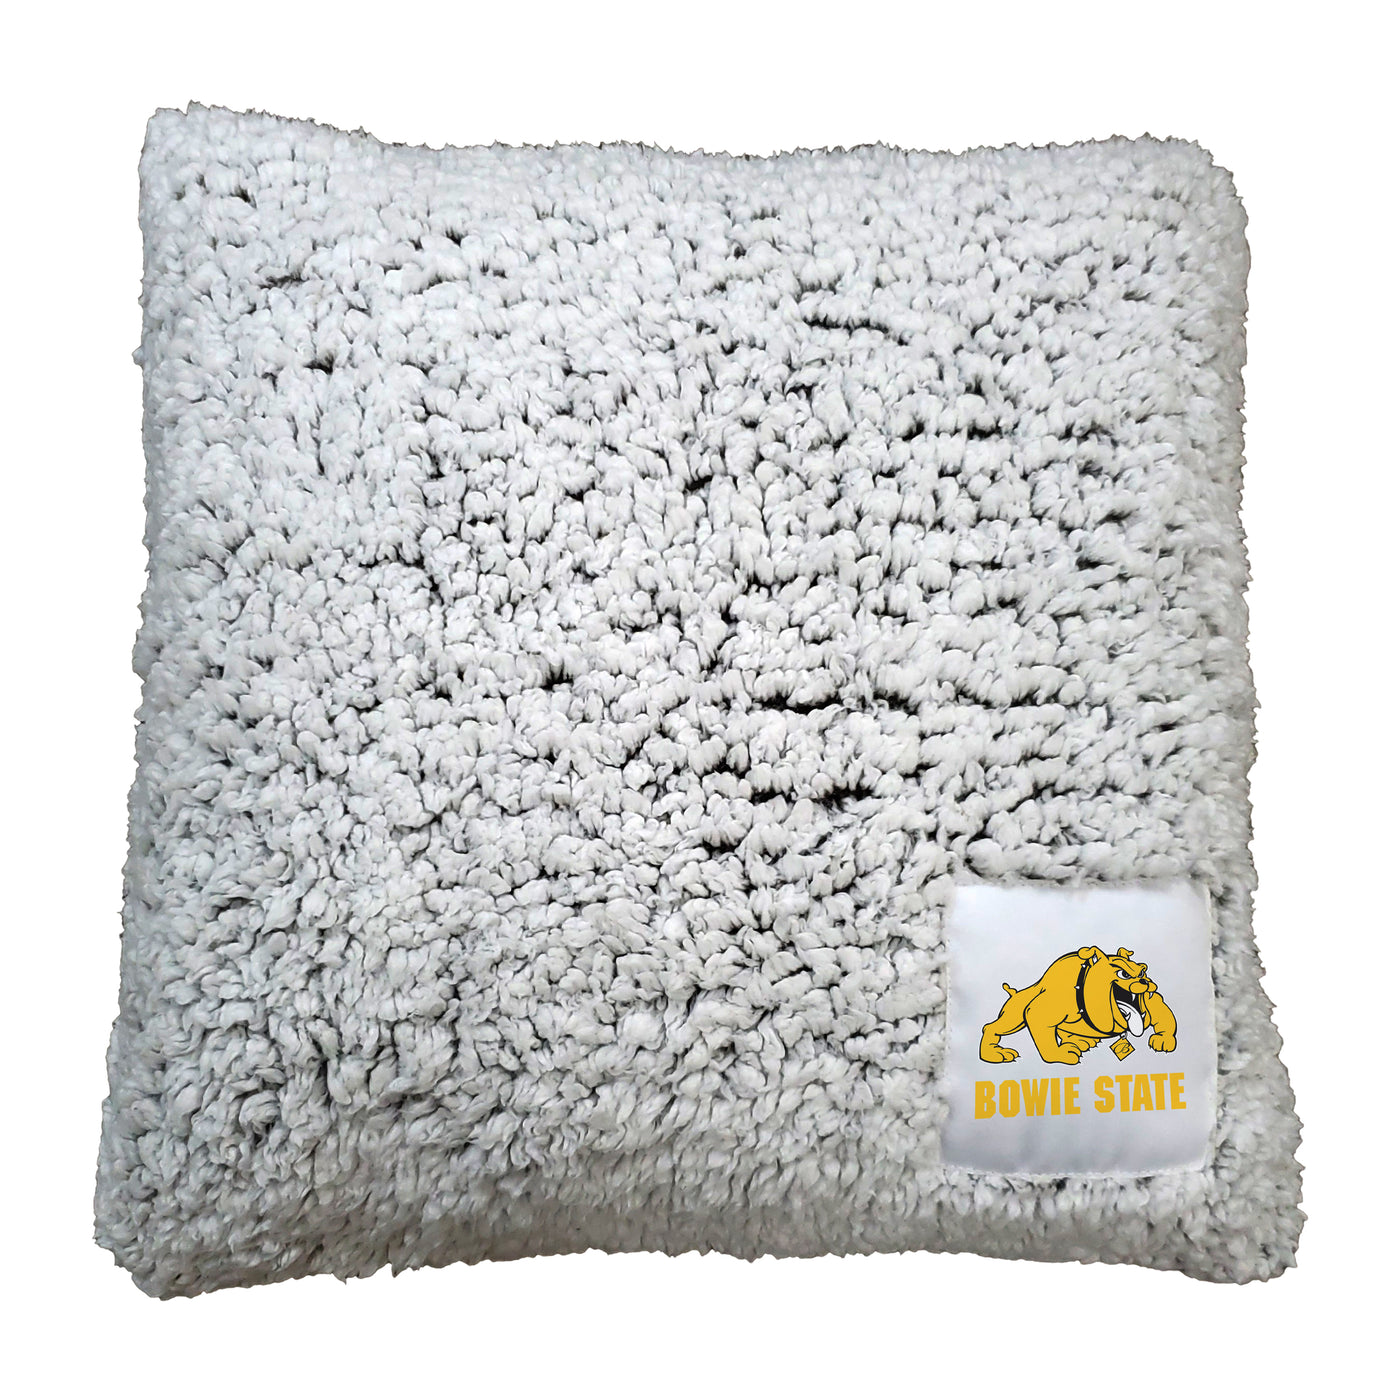 Bowie State Frosty Pillow